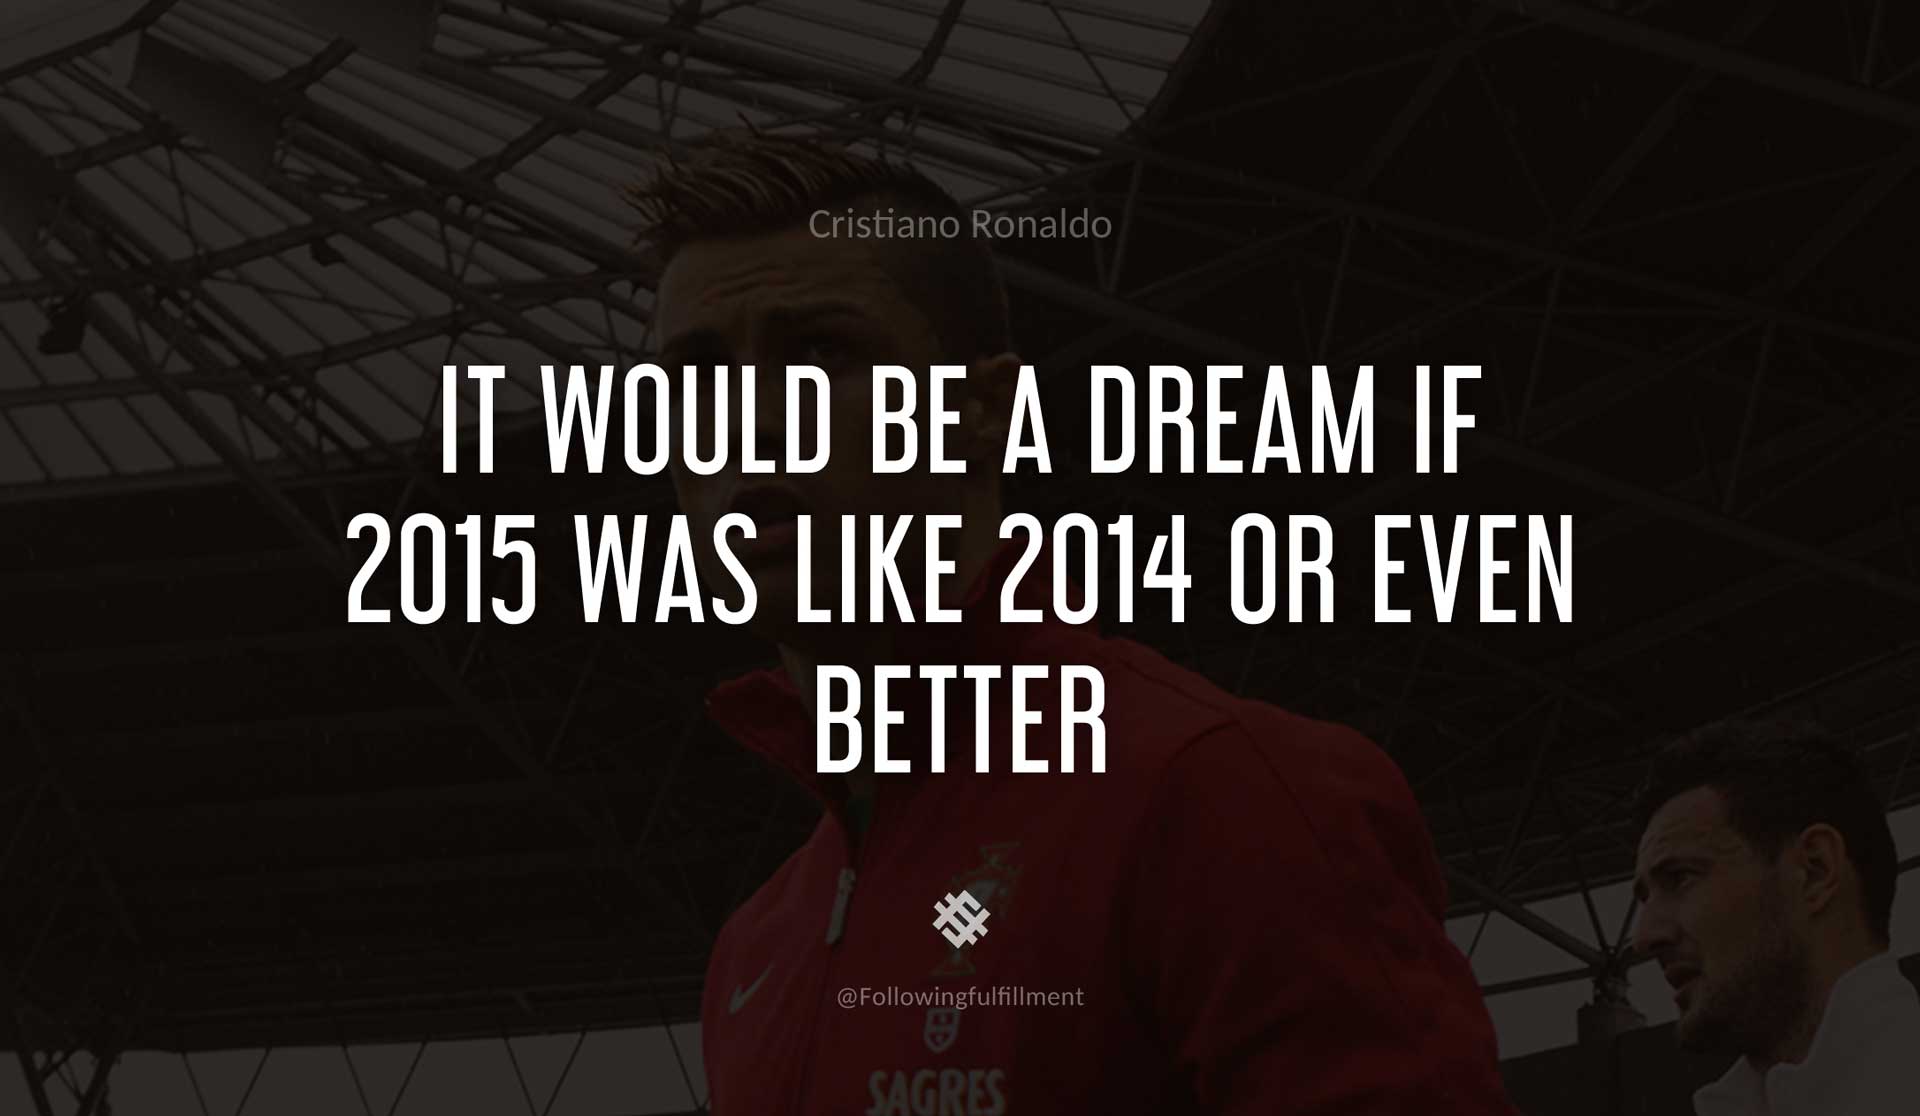 It-would-be-a-dream-if-2015-was-like-2014-or-even-better-CRISTIANO-RONALDO-Quote.jpg